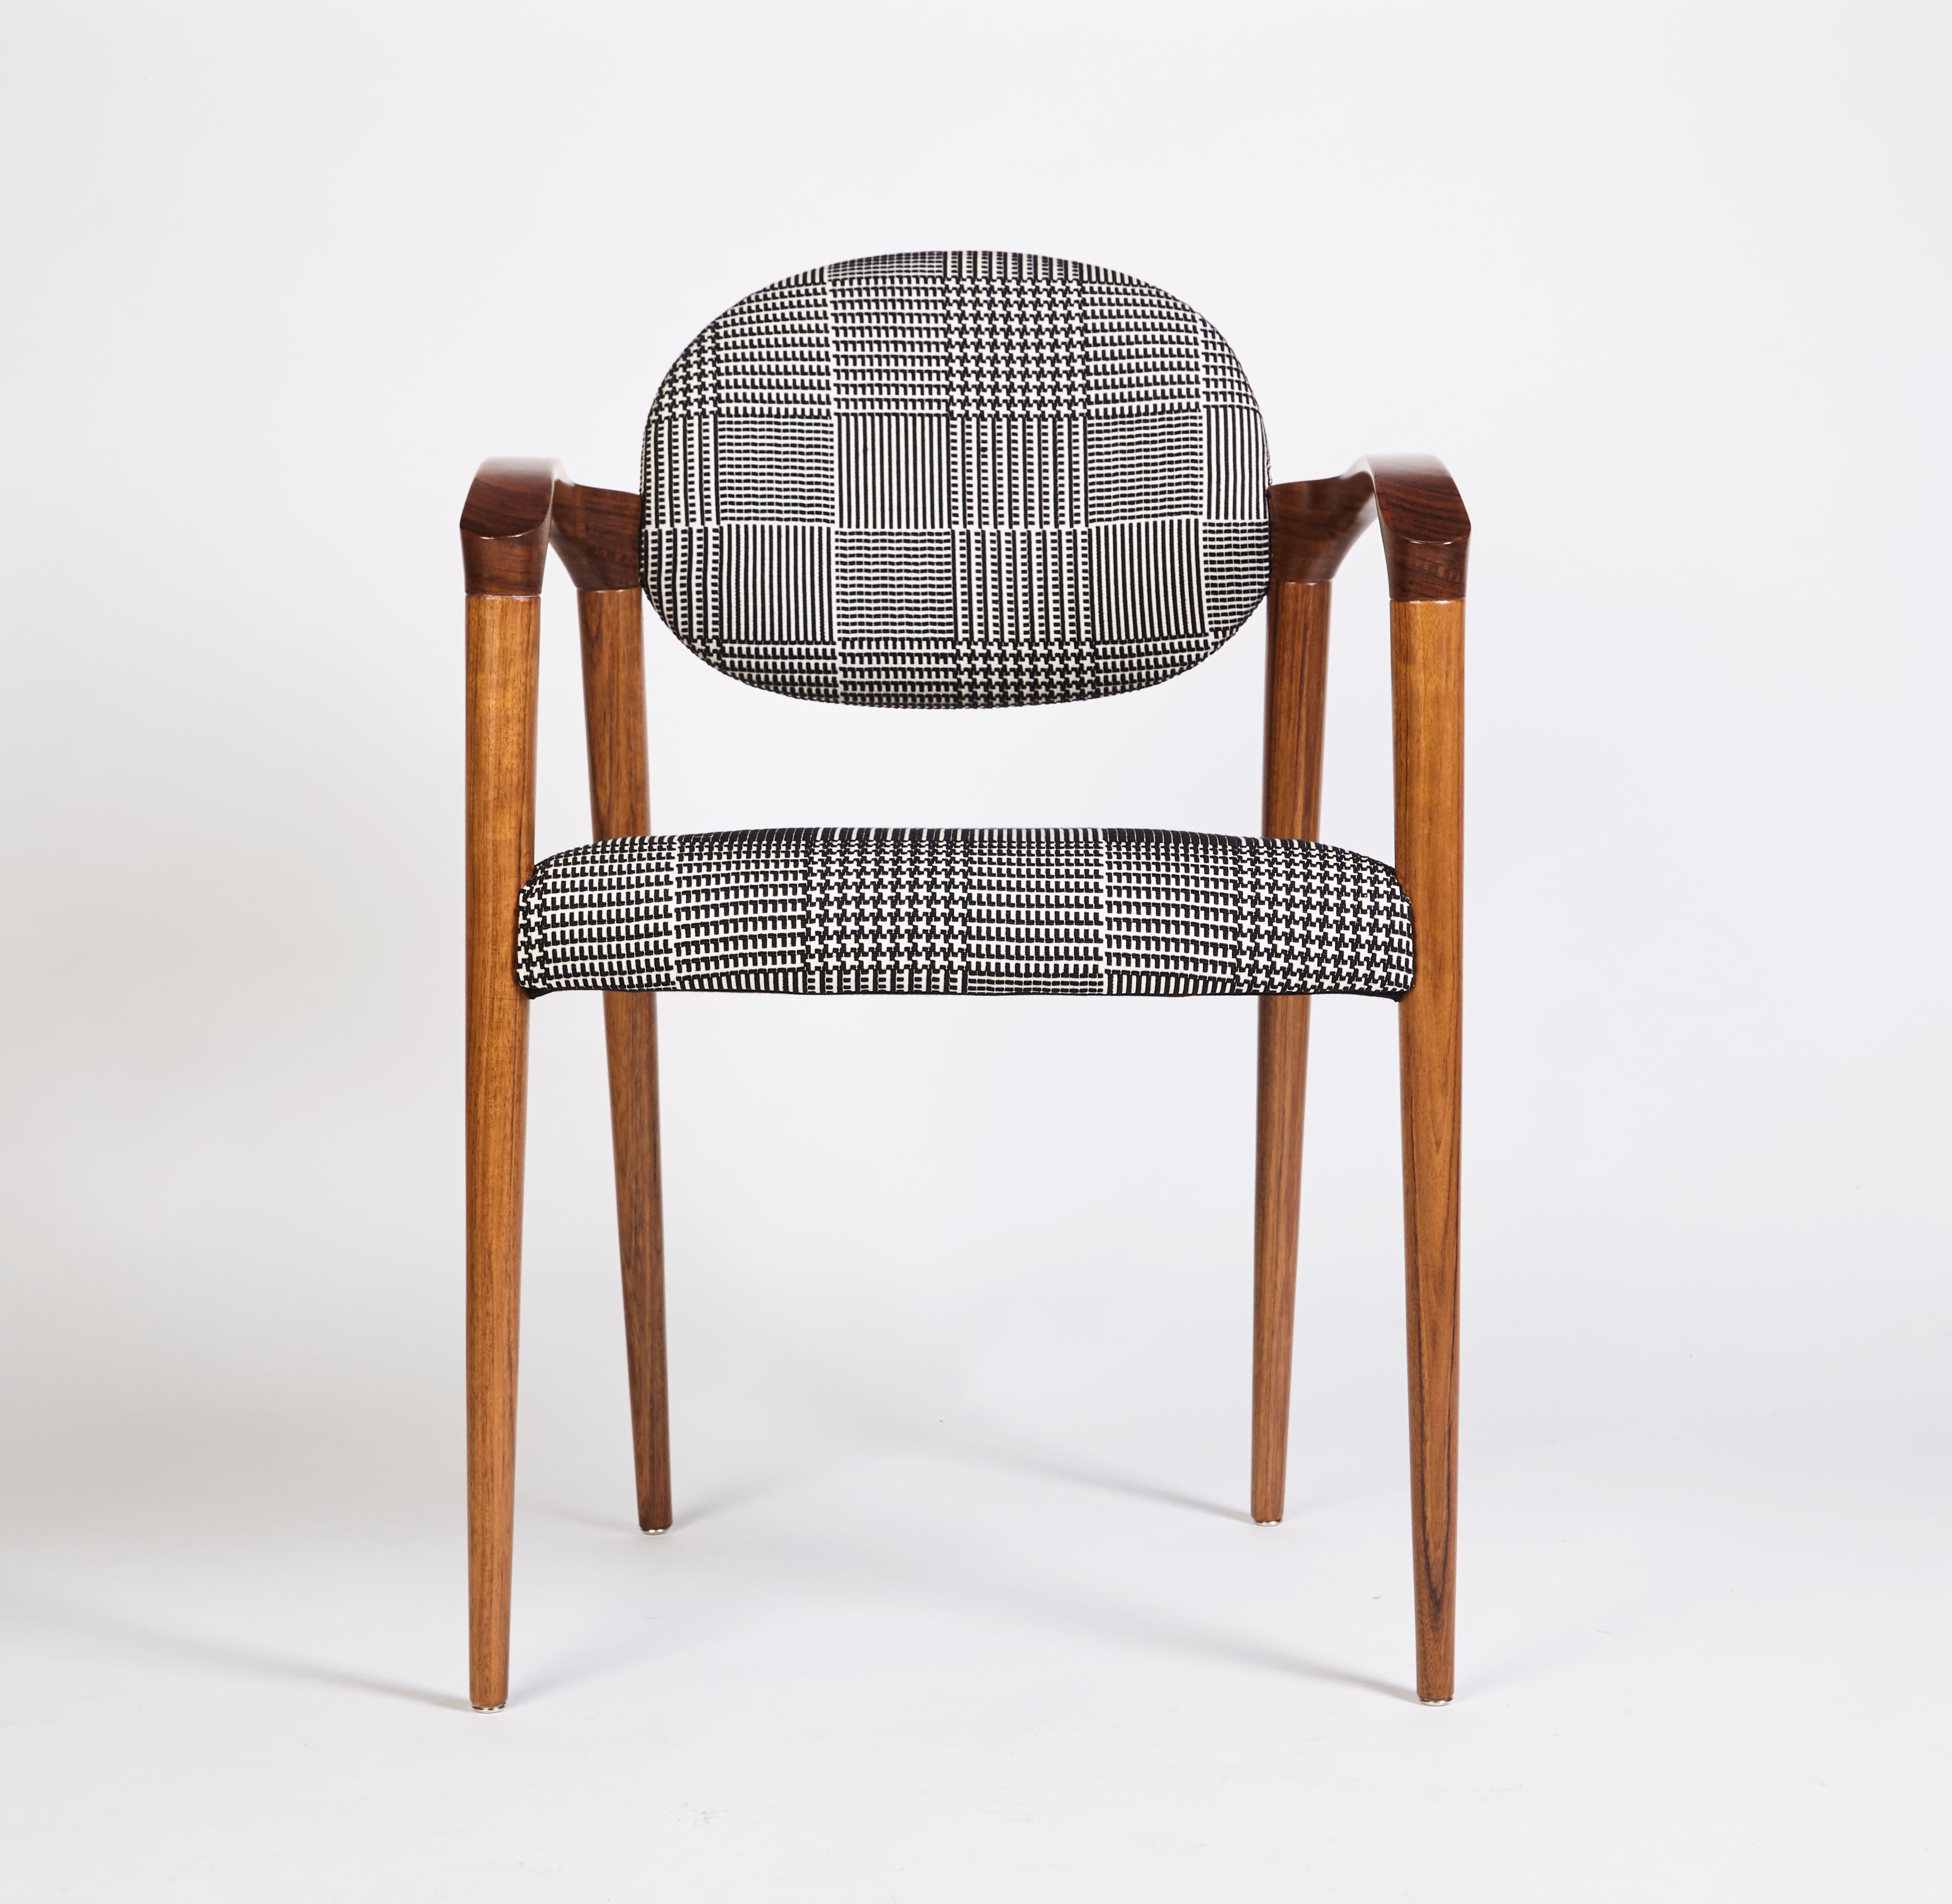 Tanoco Chair by DUISTT 
Dimensions: W 56 x D 58 x H 84 cm
Materials: Satin Mutenye Wood, Fabric SF.DE.21.001

Tanoco chair is inspired by the mid-century architecture and interior design, with its long arches creating simultaneously a sensation of